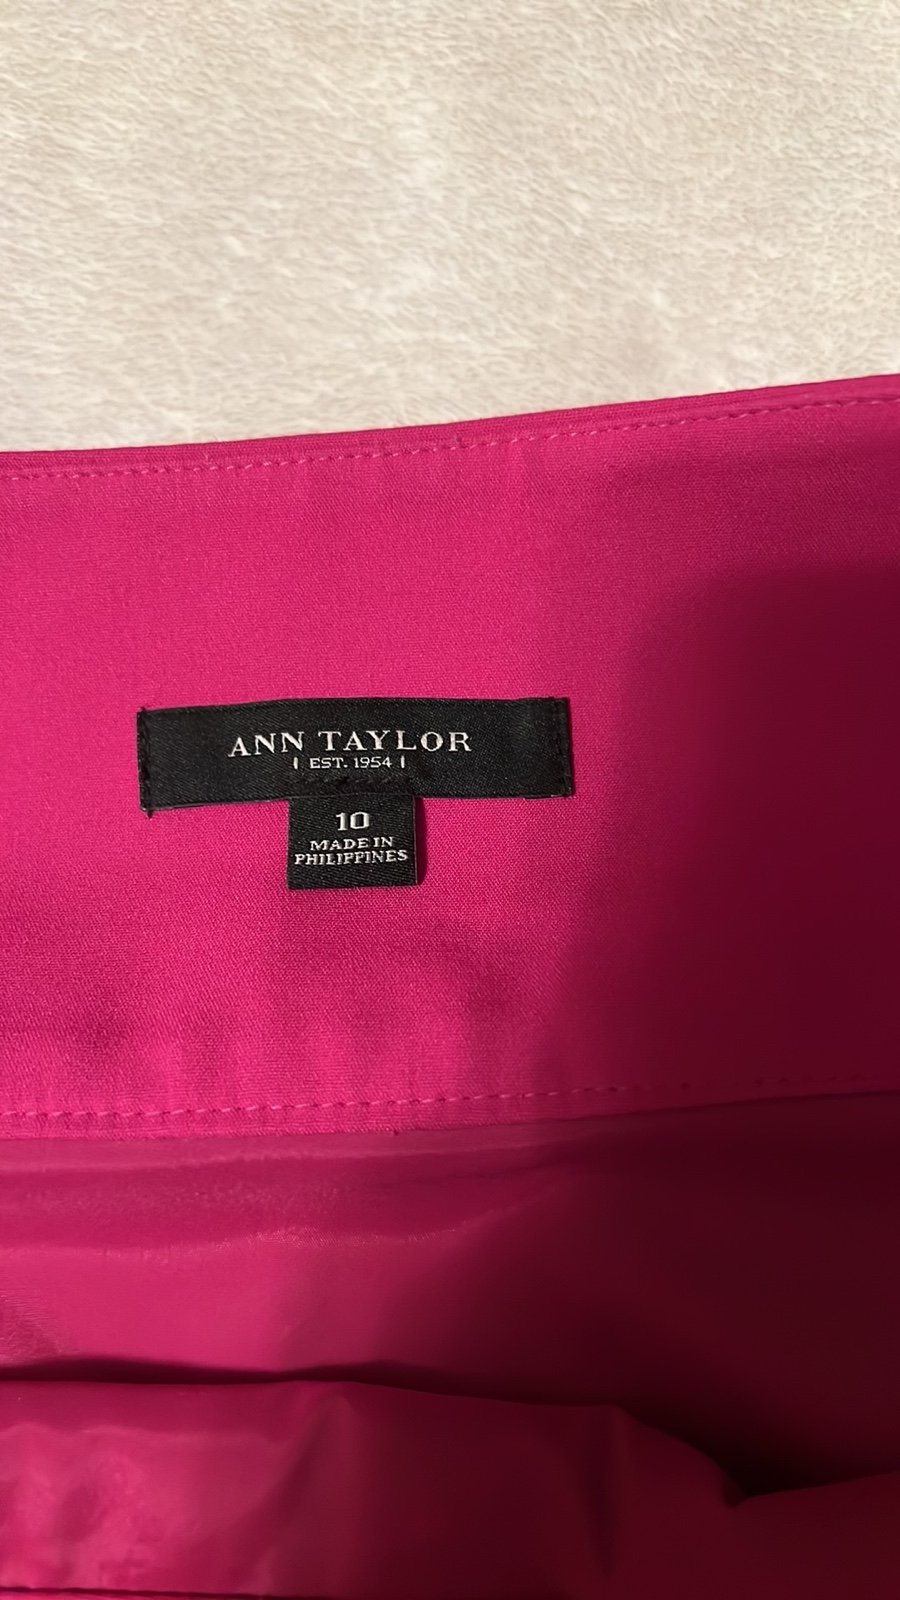 Authentic Ann Taylor Womens Pink Skirt Size 10 JssbZ4C3z Outlet Store